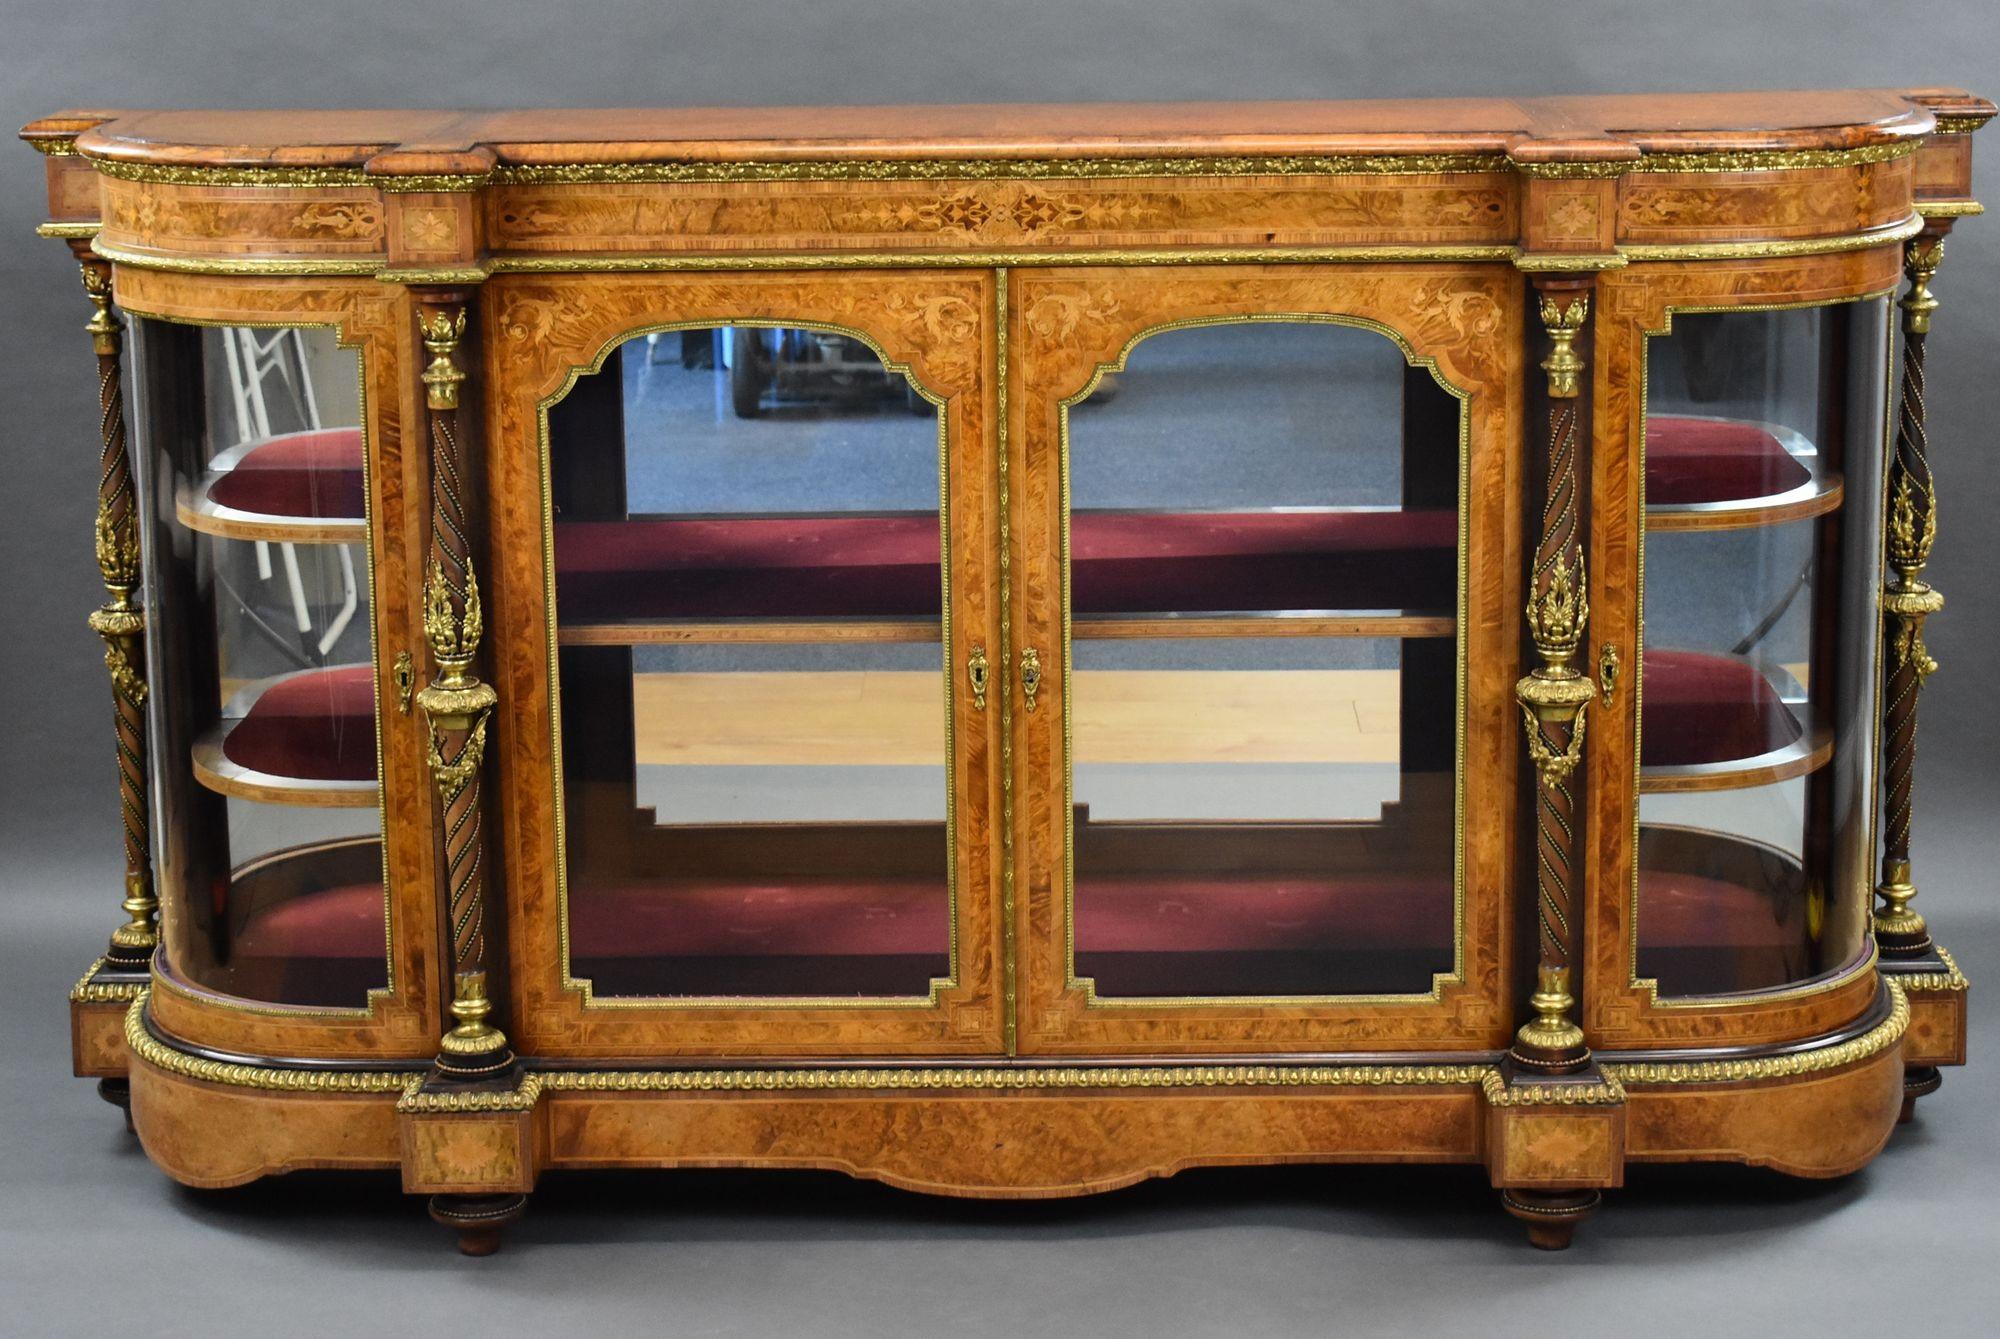 For sale is a top quality Victorian burr walnut & marquetry credenza, having an amboyna and cross banded top, above two glazed door flanked by two bowed glass doors to each end, separated by ornate columns with decorative brass work. Decorated with